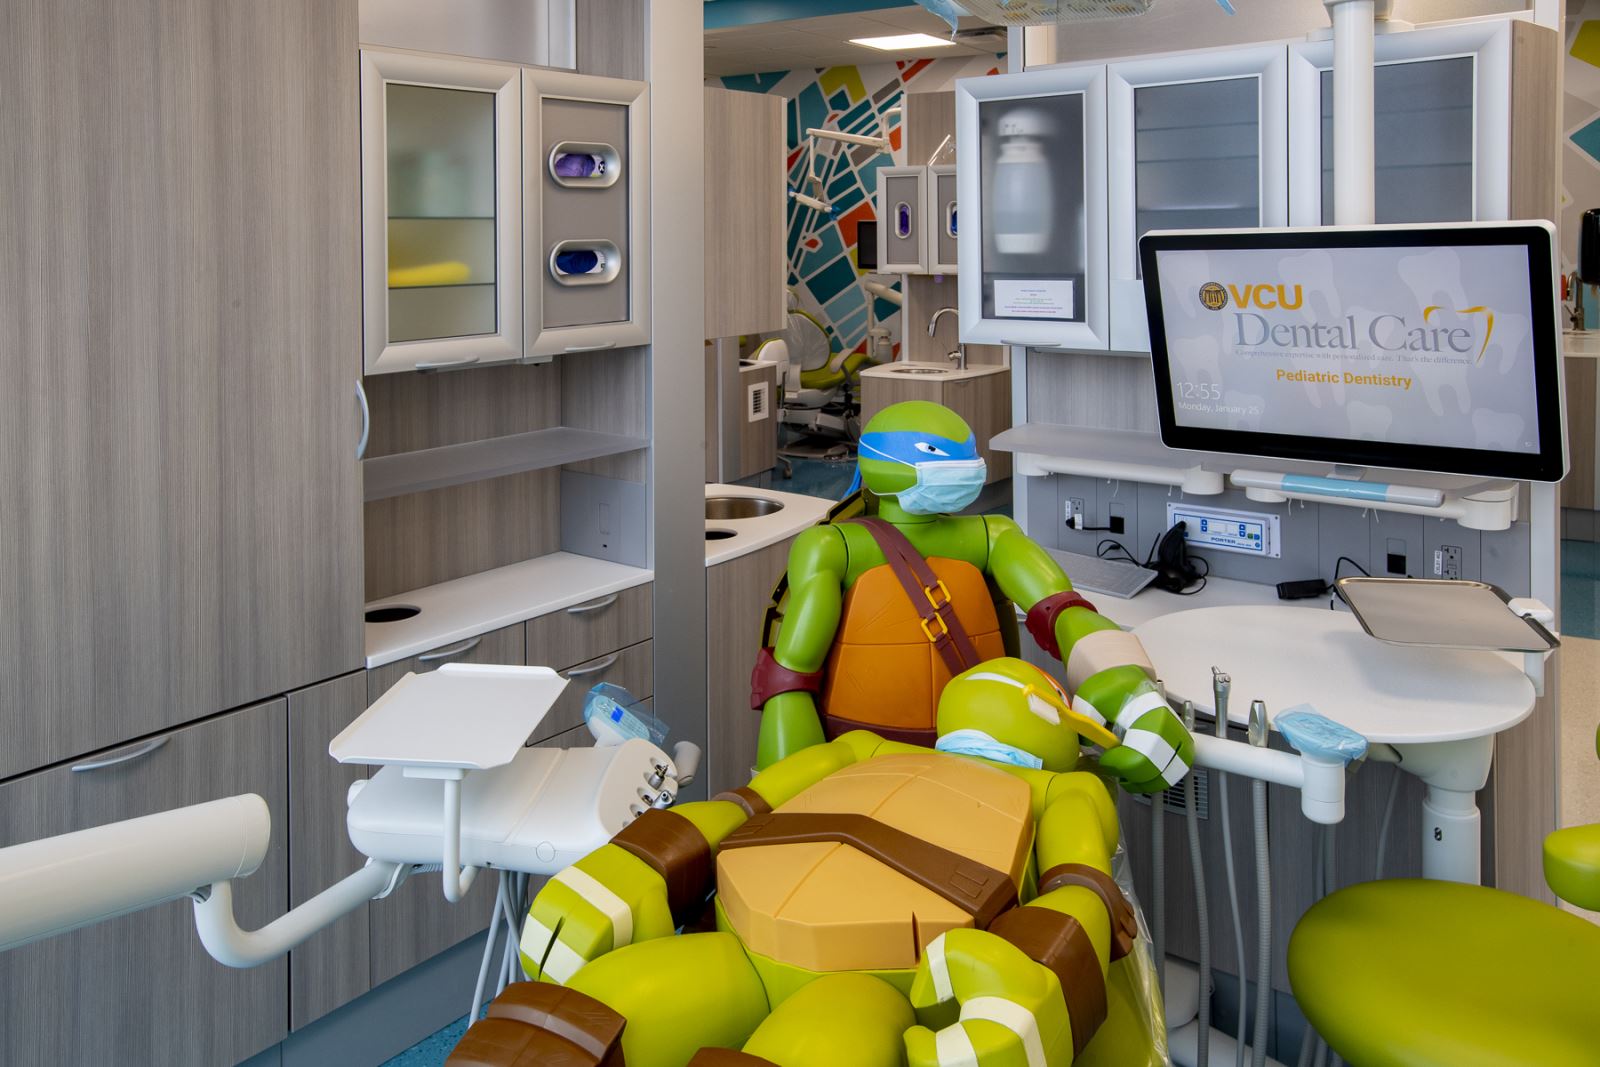 Tips To Prepare Your Child For Their First Pediatric Dentist Visit